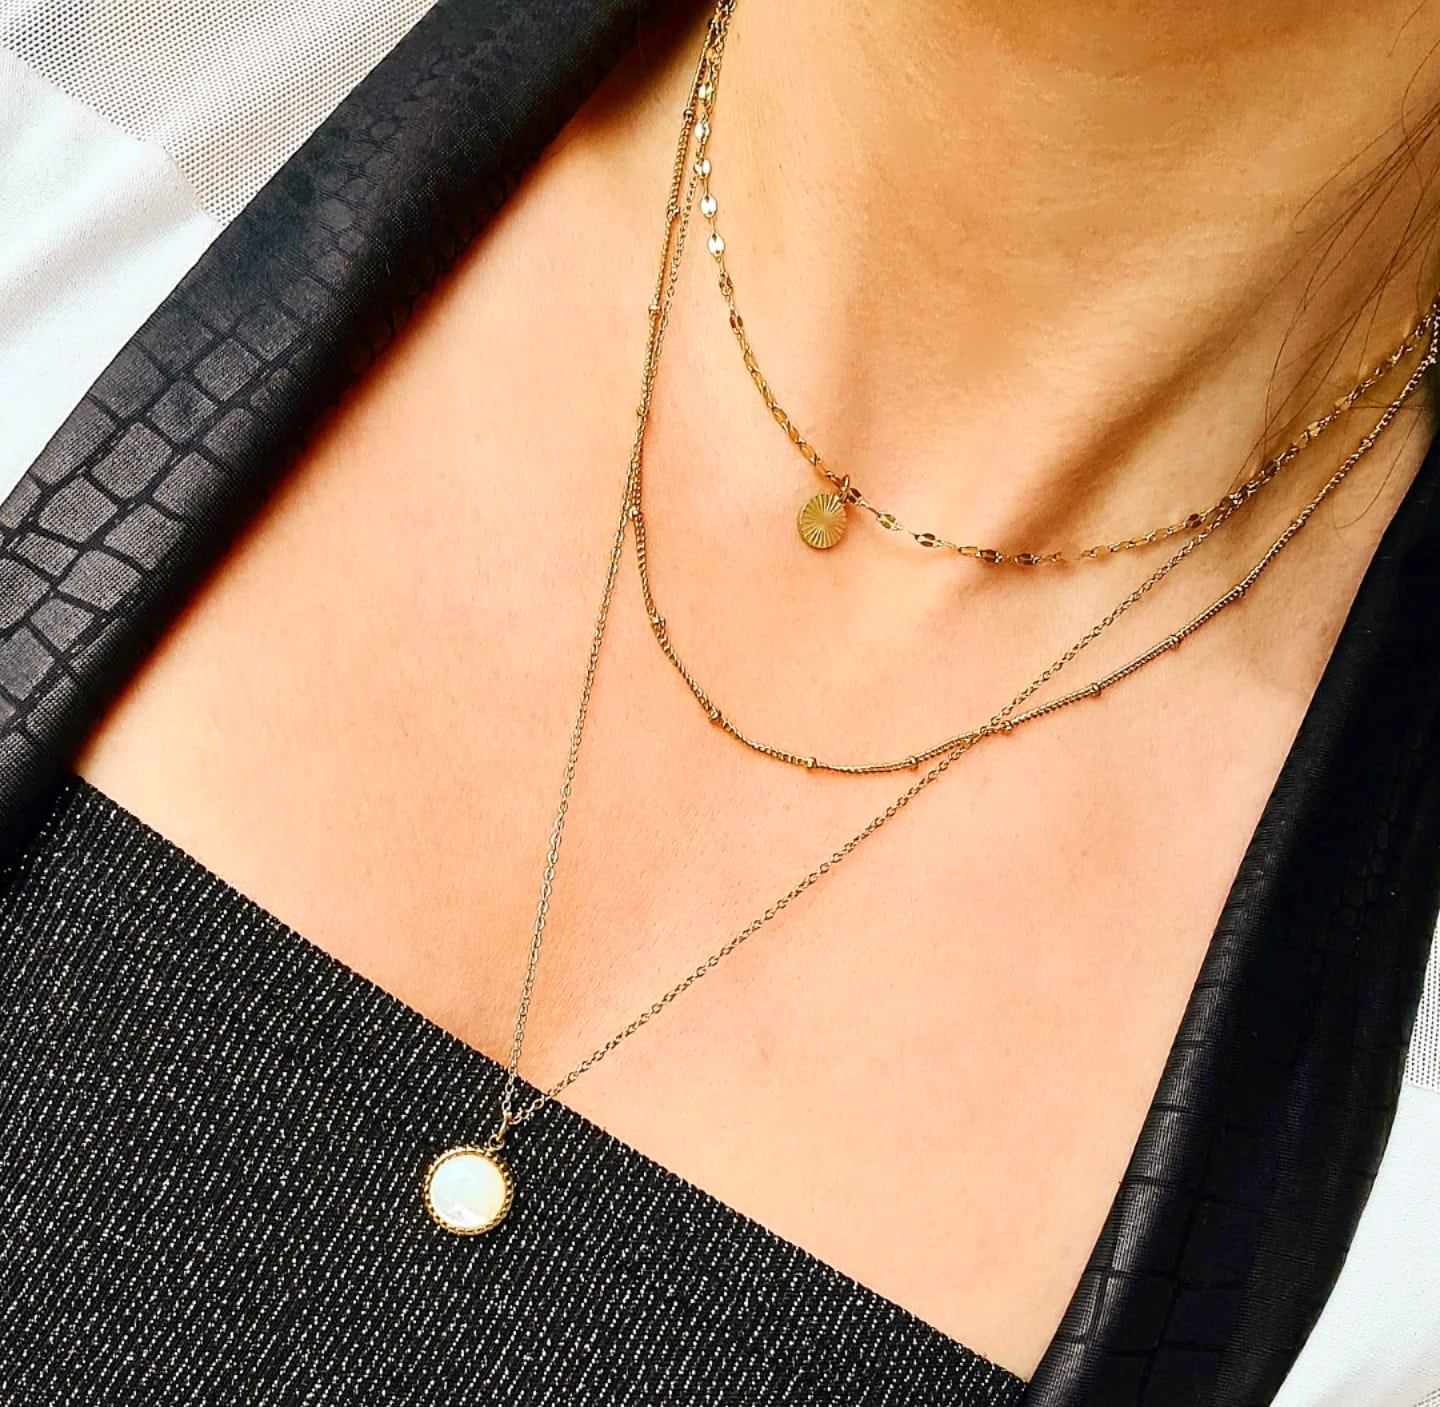 Woman wearing multiple necklaces. The woman is wearing a black top and a gold necklace with a white pendant. She also has a necklace with a stone, and a necklace with a round pendant, and. The necklaces are layered around her neck and add a touch of elegance to her outfit.